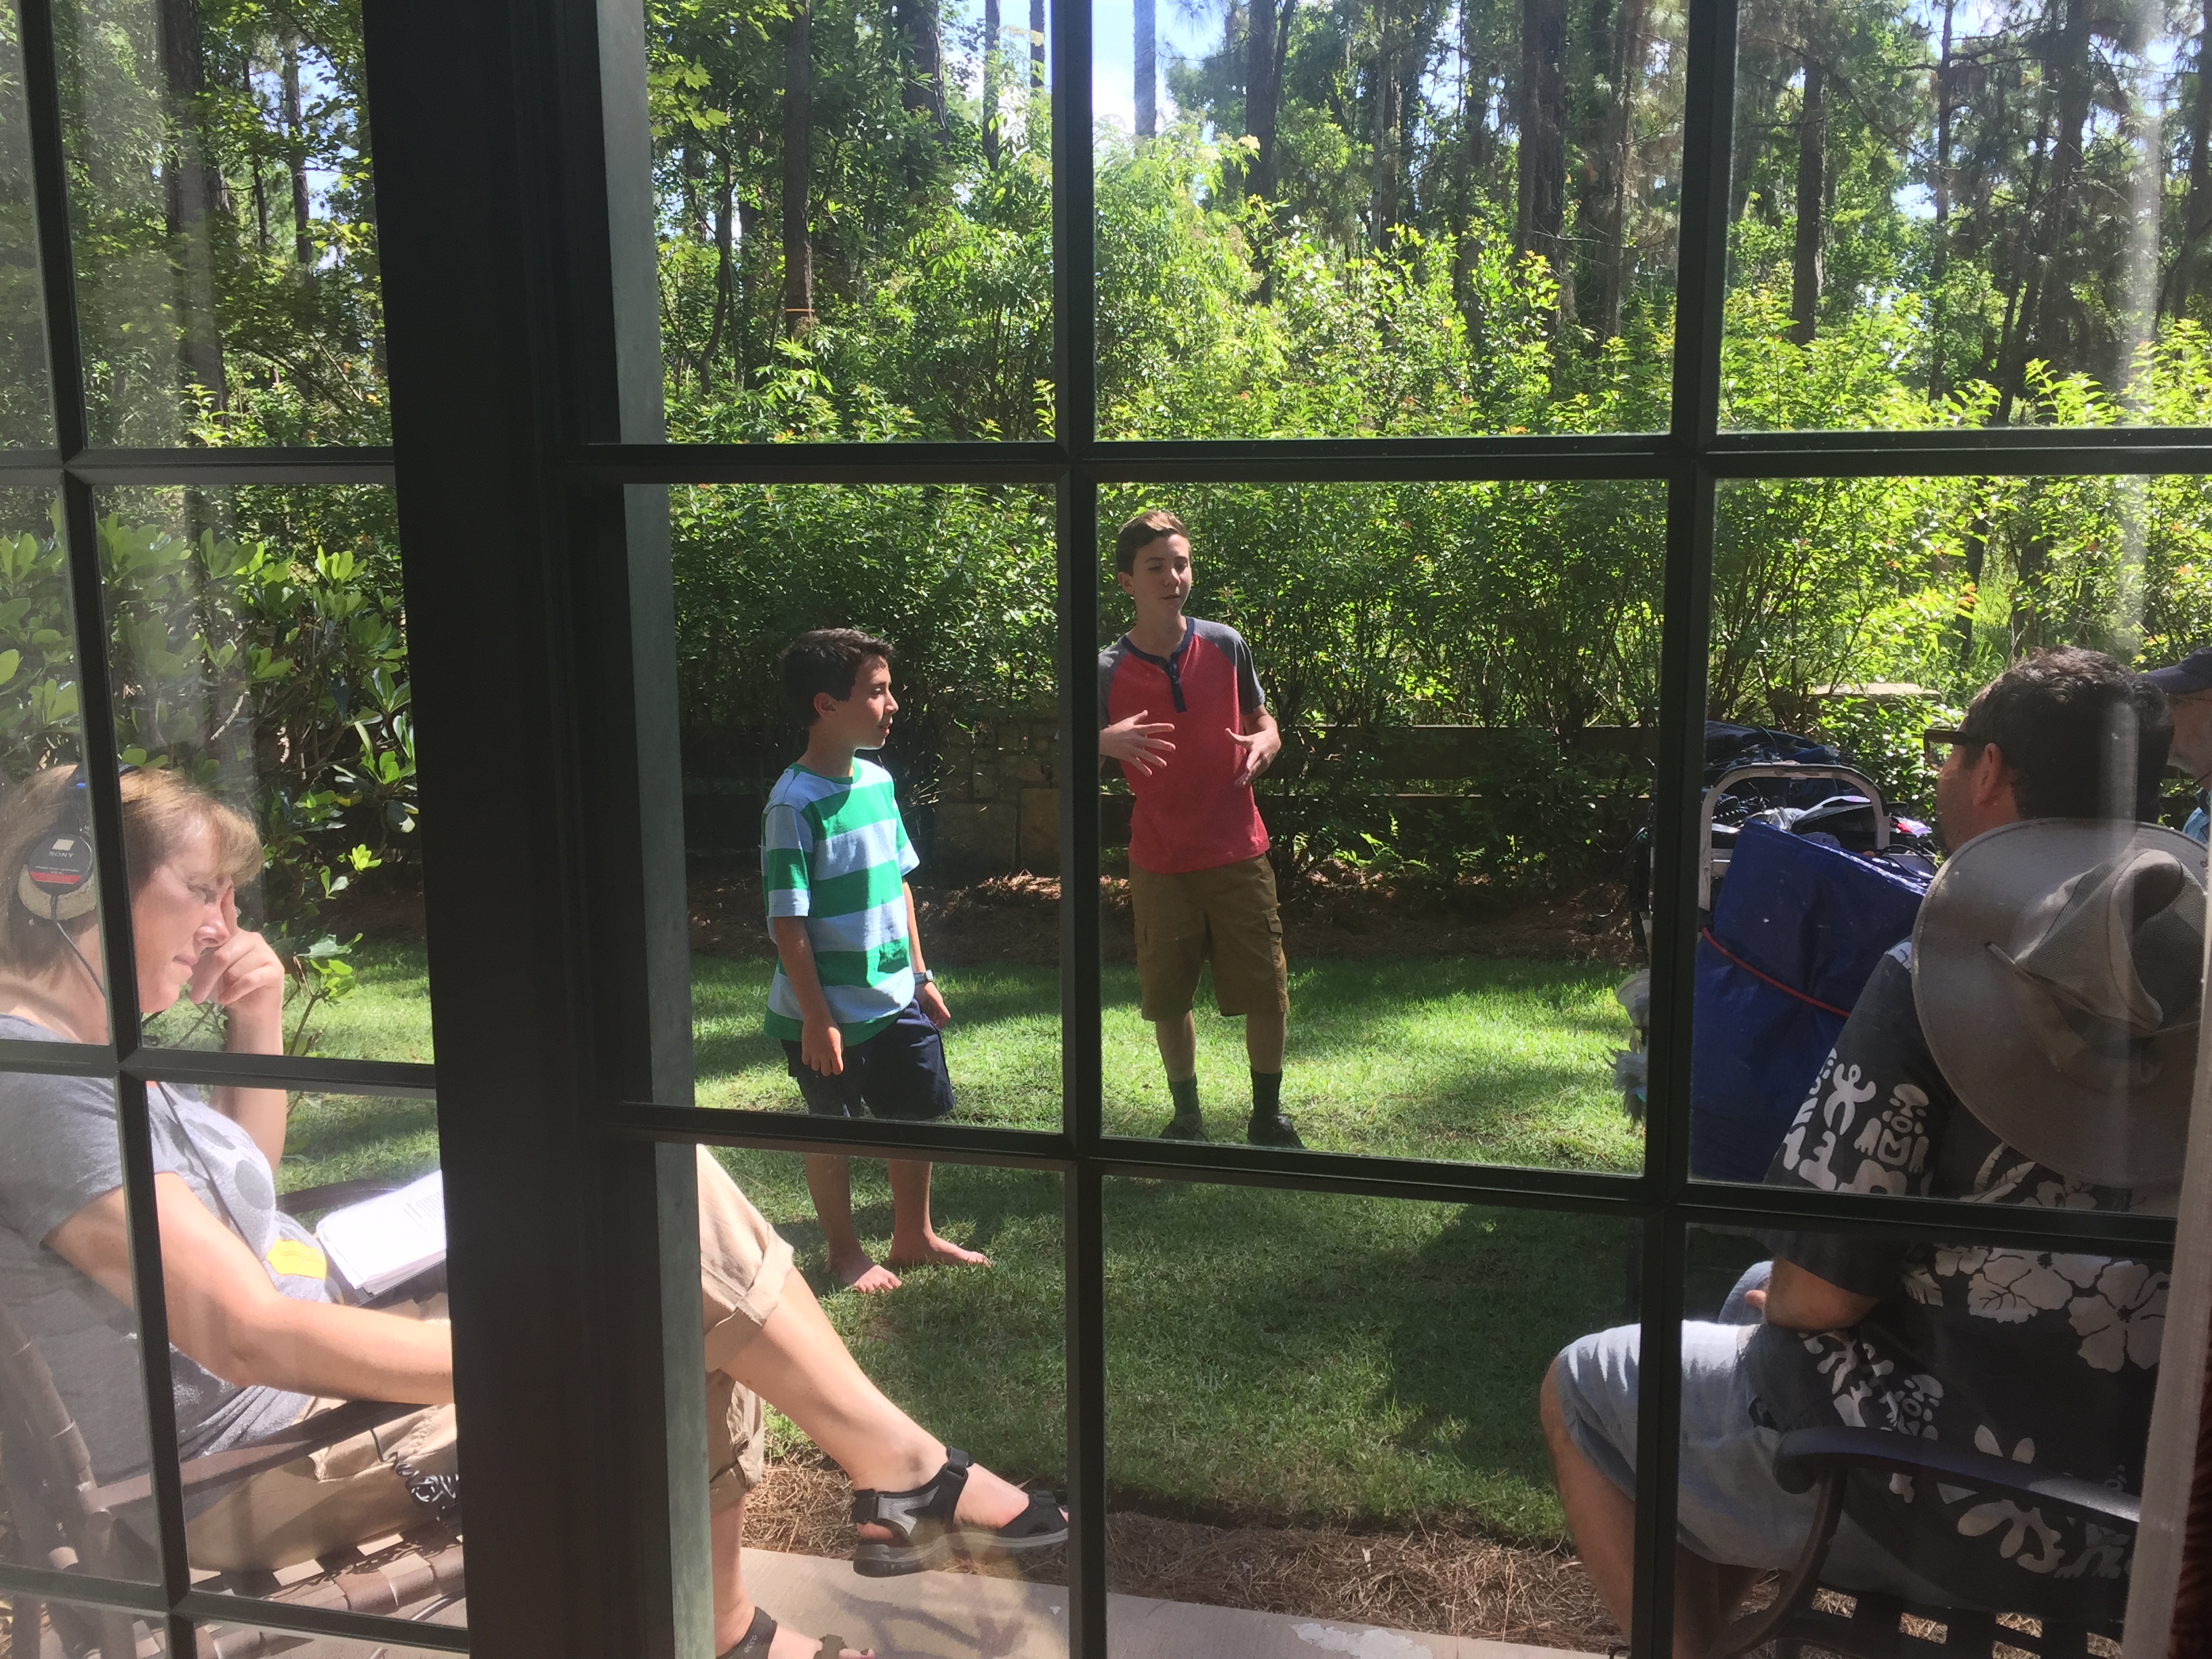 Jordan and his brother Daniel, on the Disney XD set. Getting interviewed and doing their voice overs.